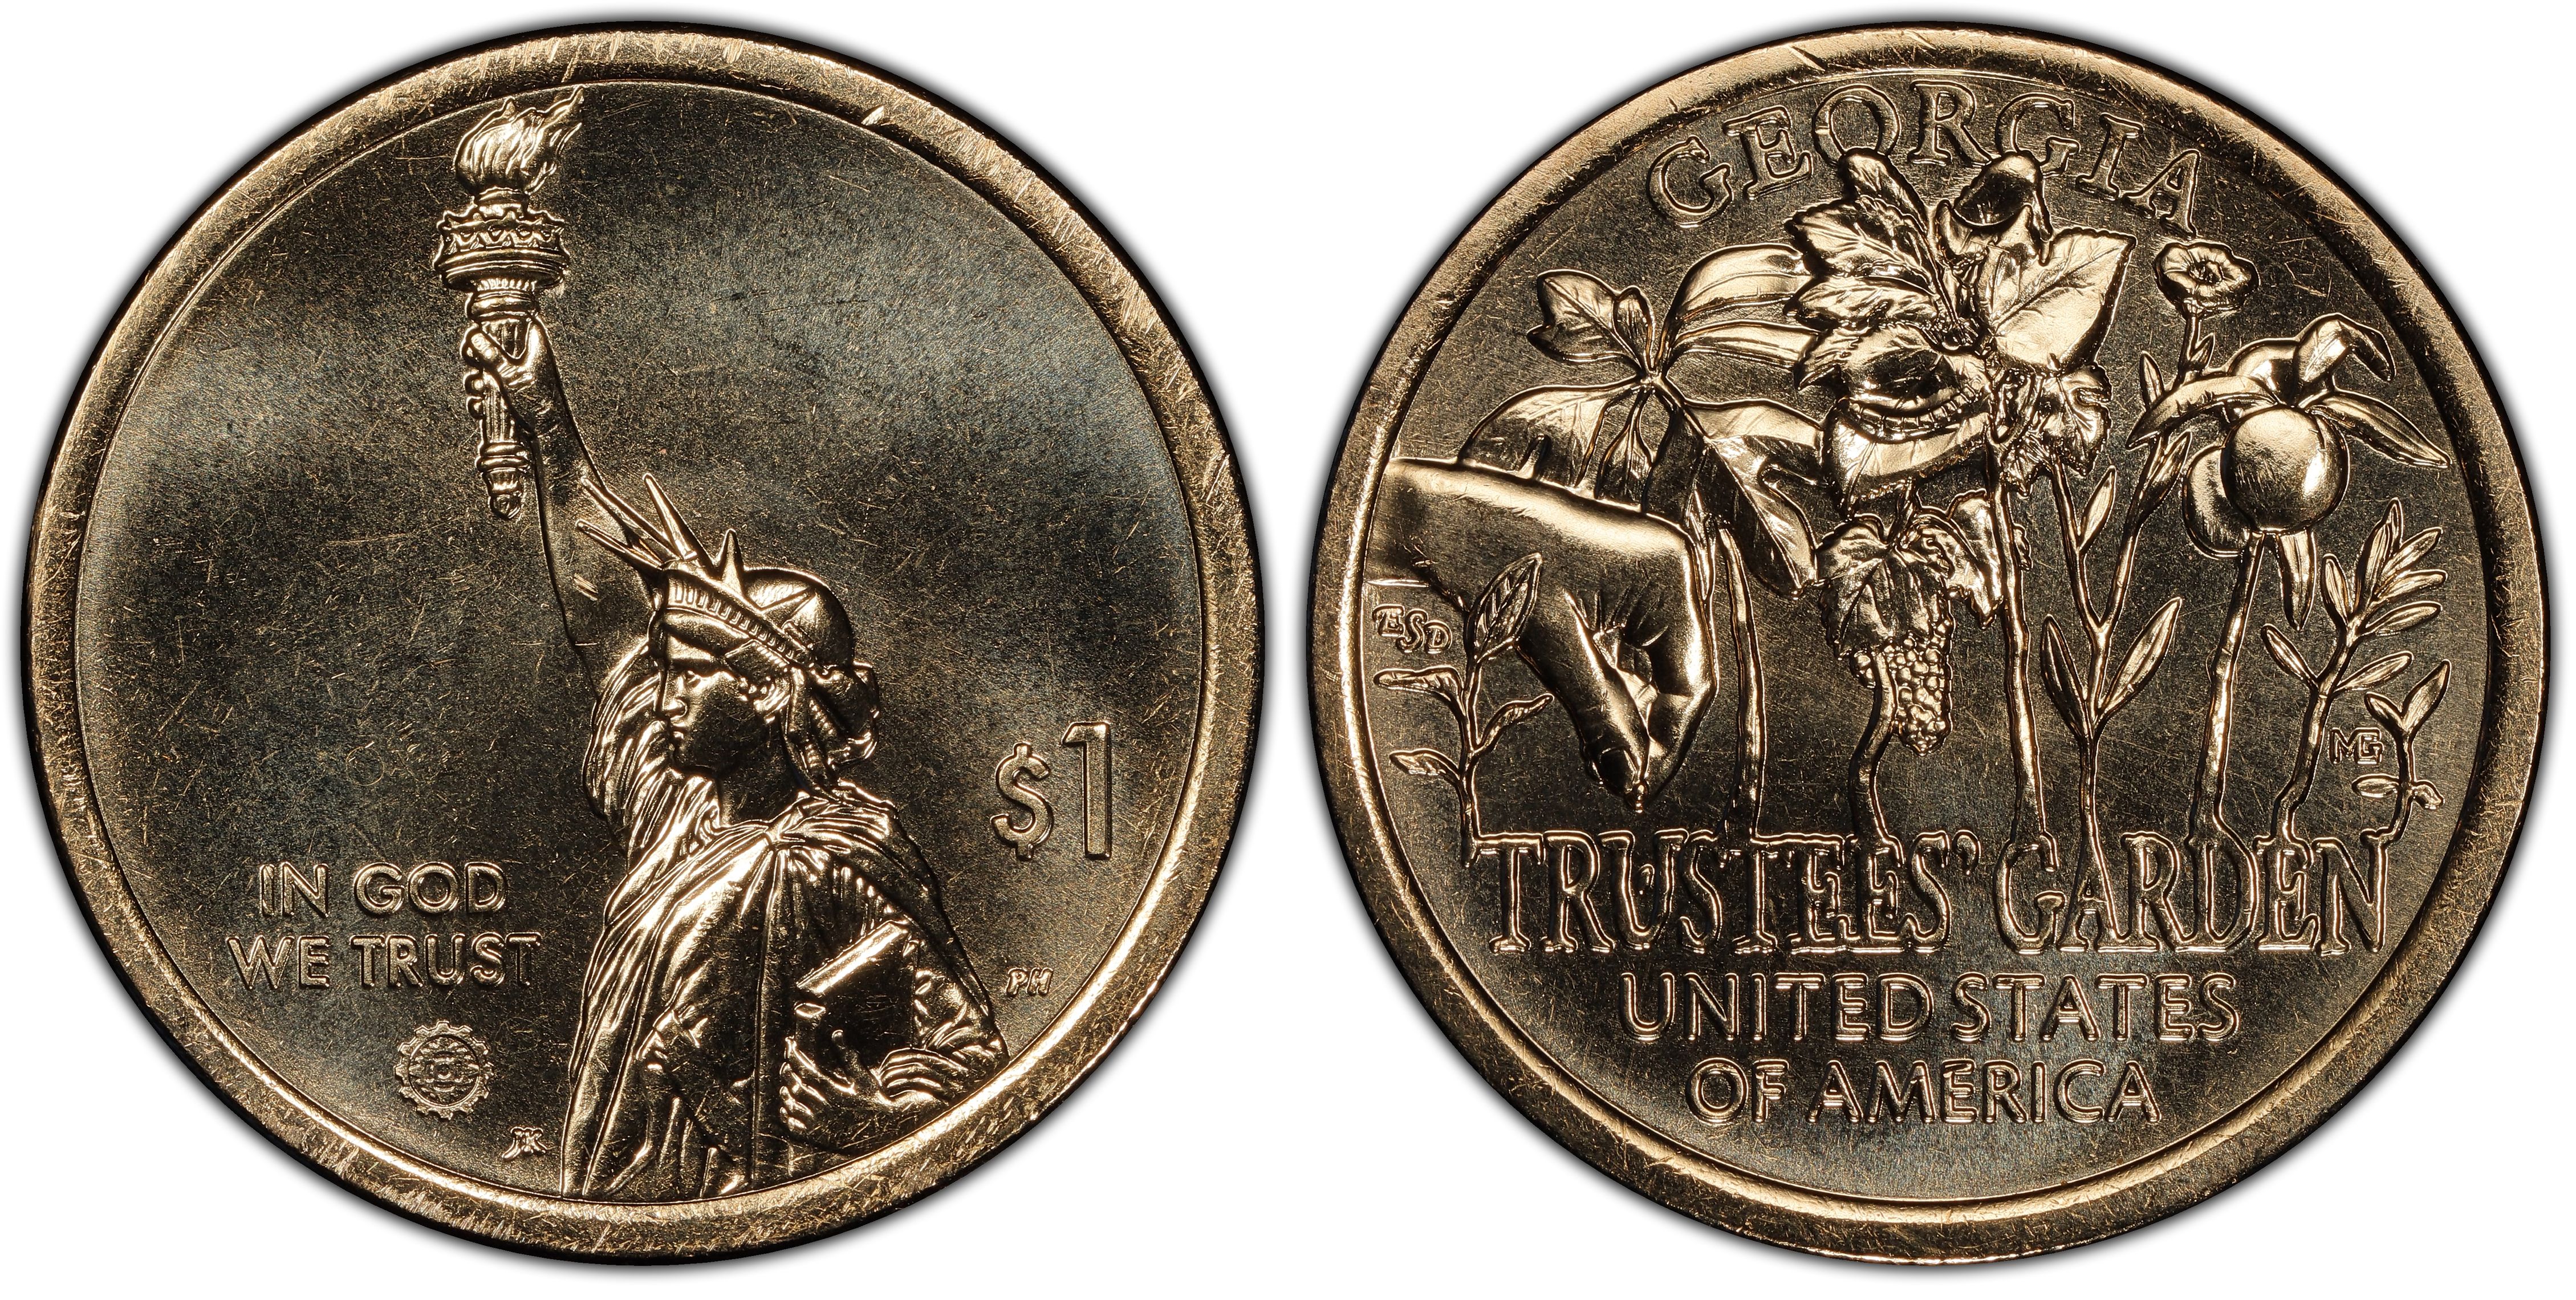 Georgia - Trustees’ Garden Details about   American Innovation Dollar 2019 Commemorative Coin 